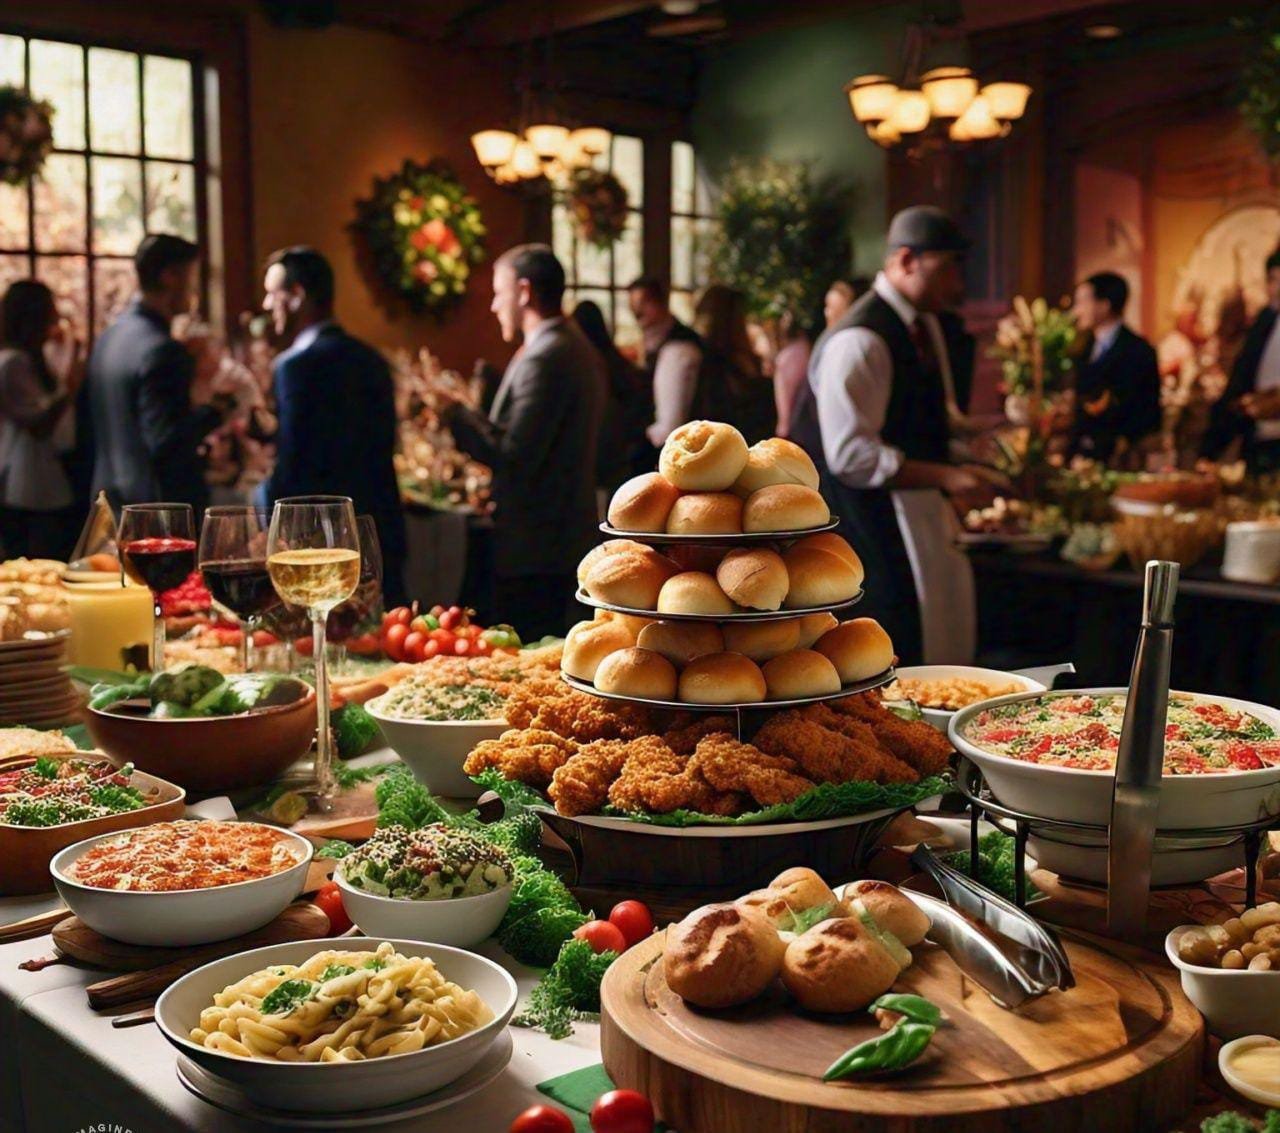 Olive Garden Catering: 10 Delicious Italian Dishes for Your Next Event